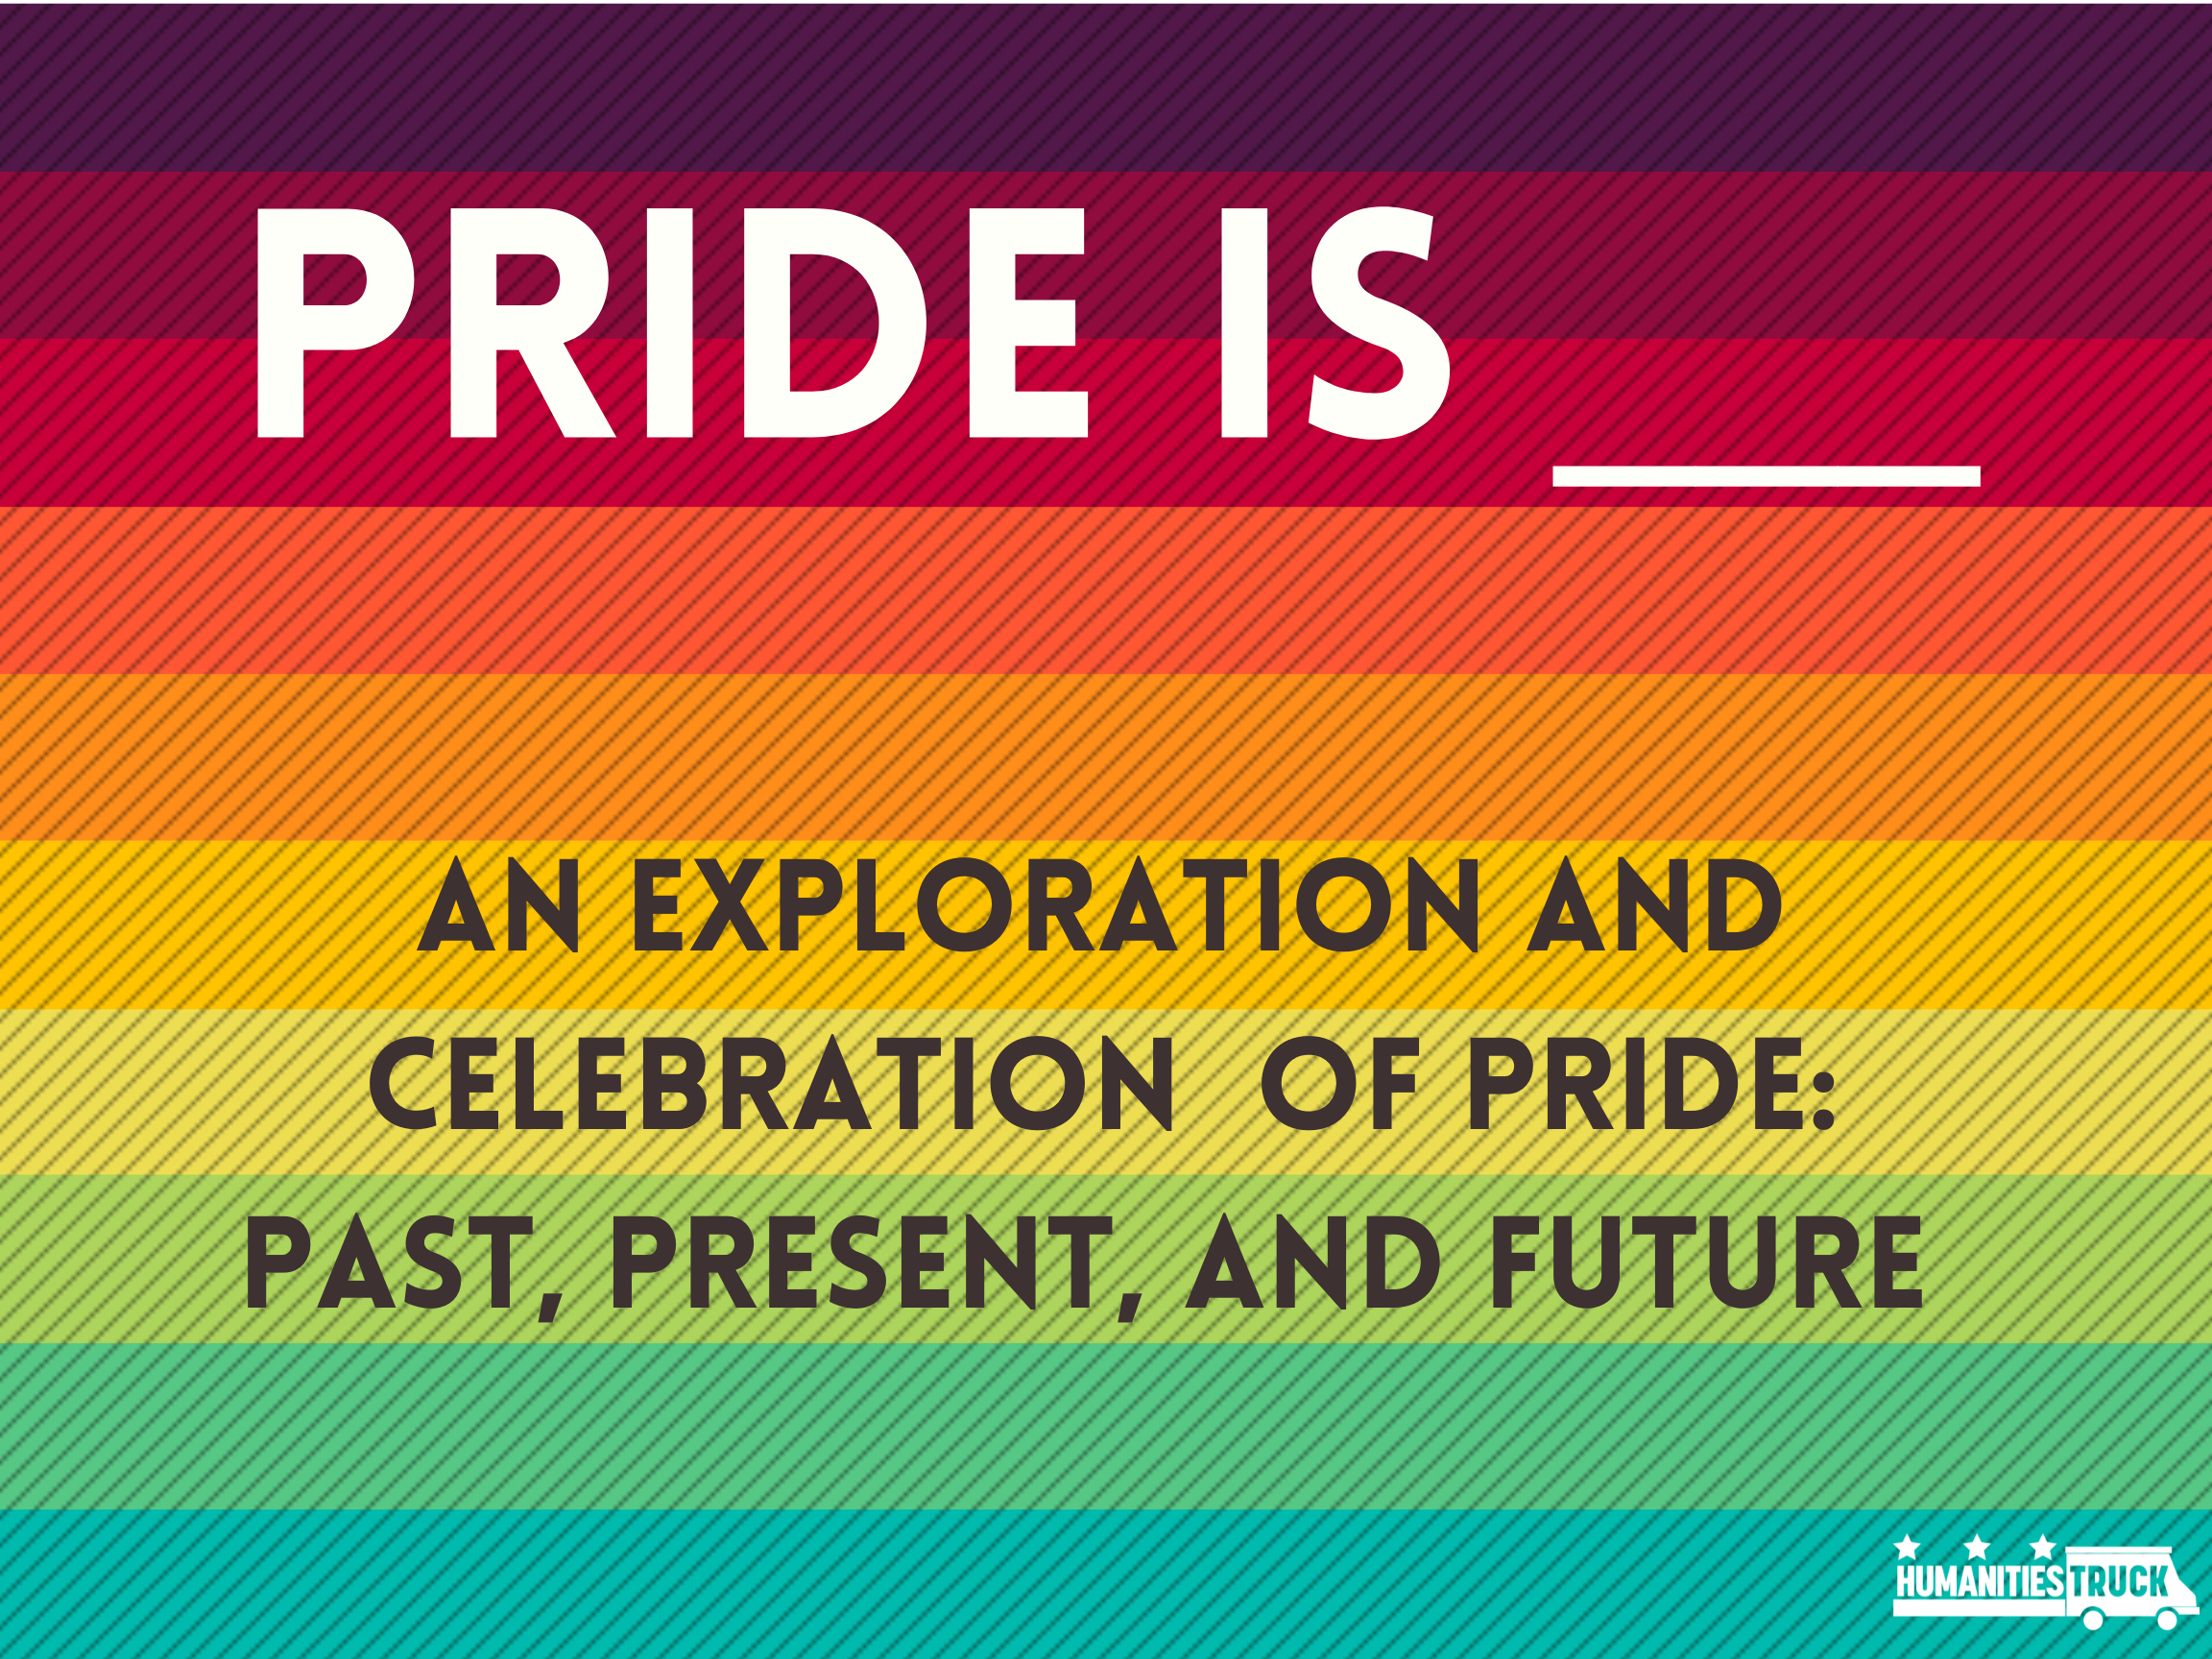 Pride Is: An Exploration and Celebration of Pride: Past, Present, and Future written over a rainbow background